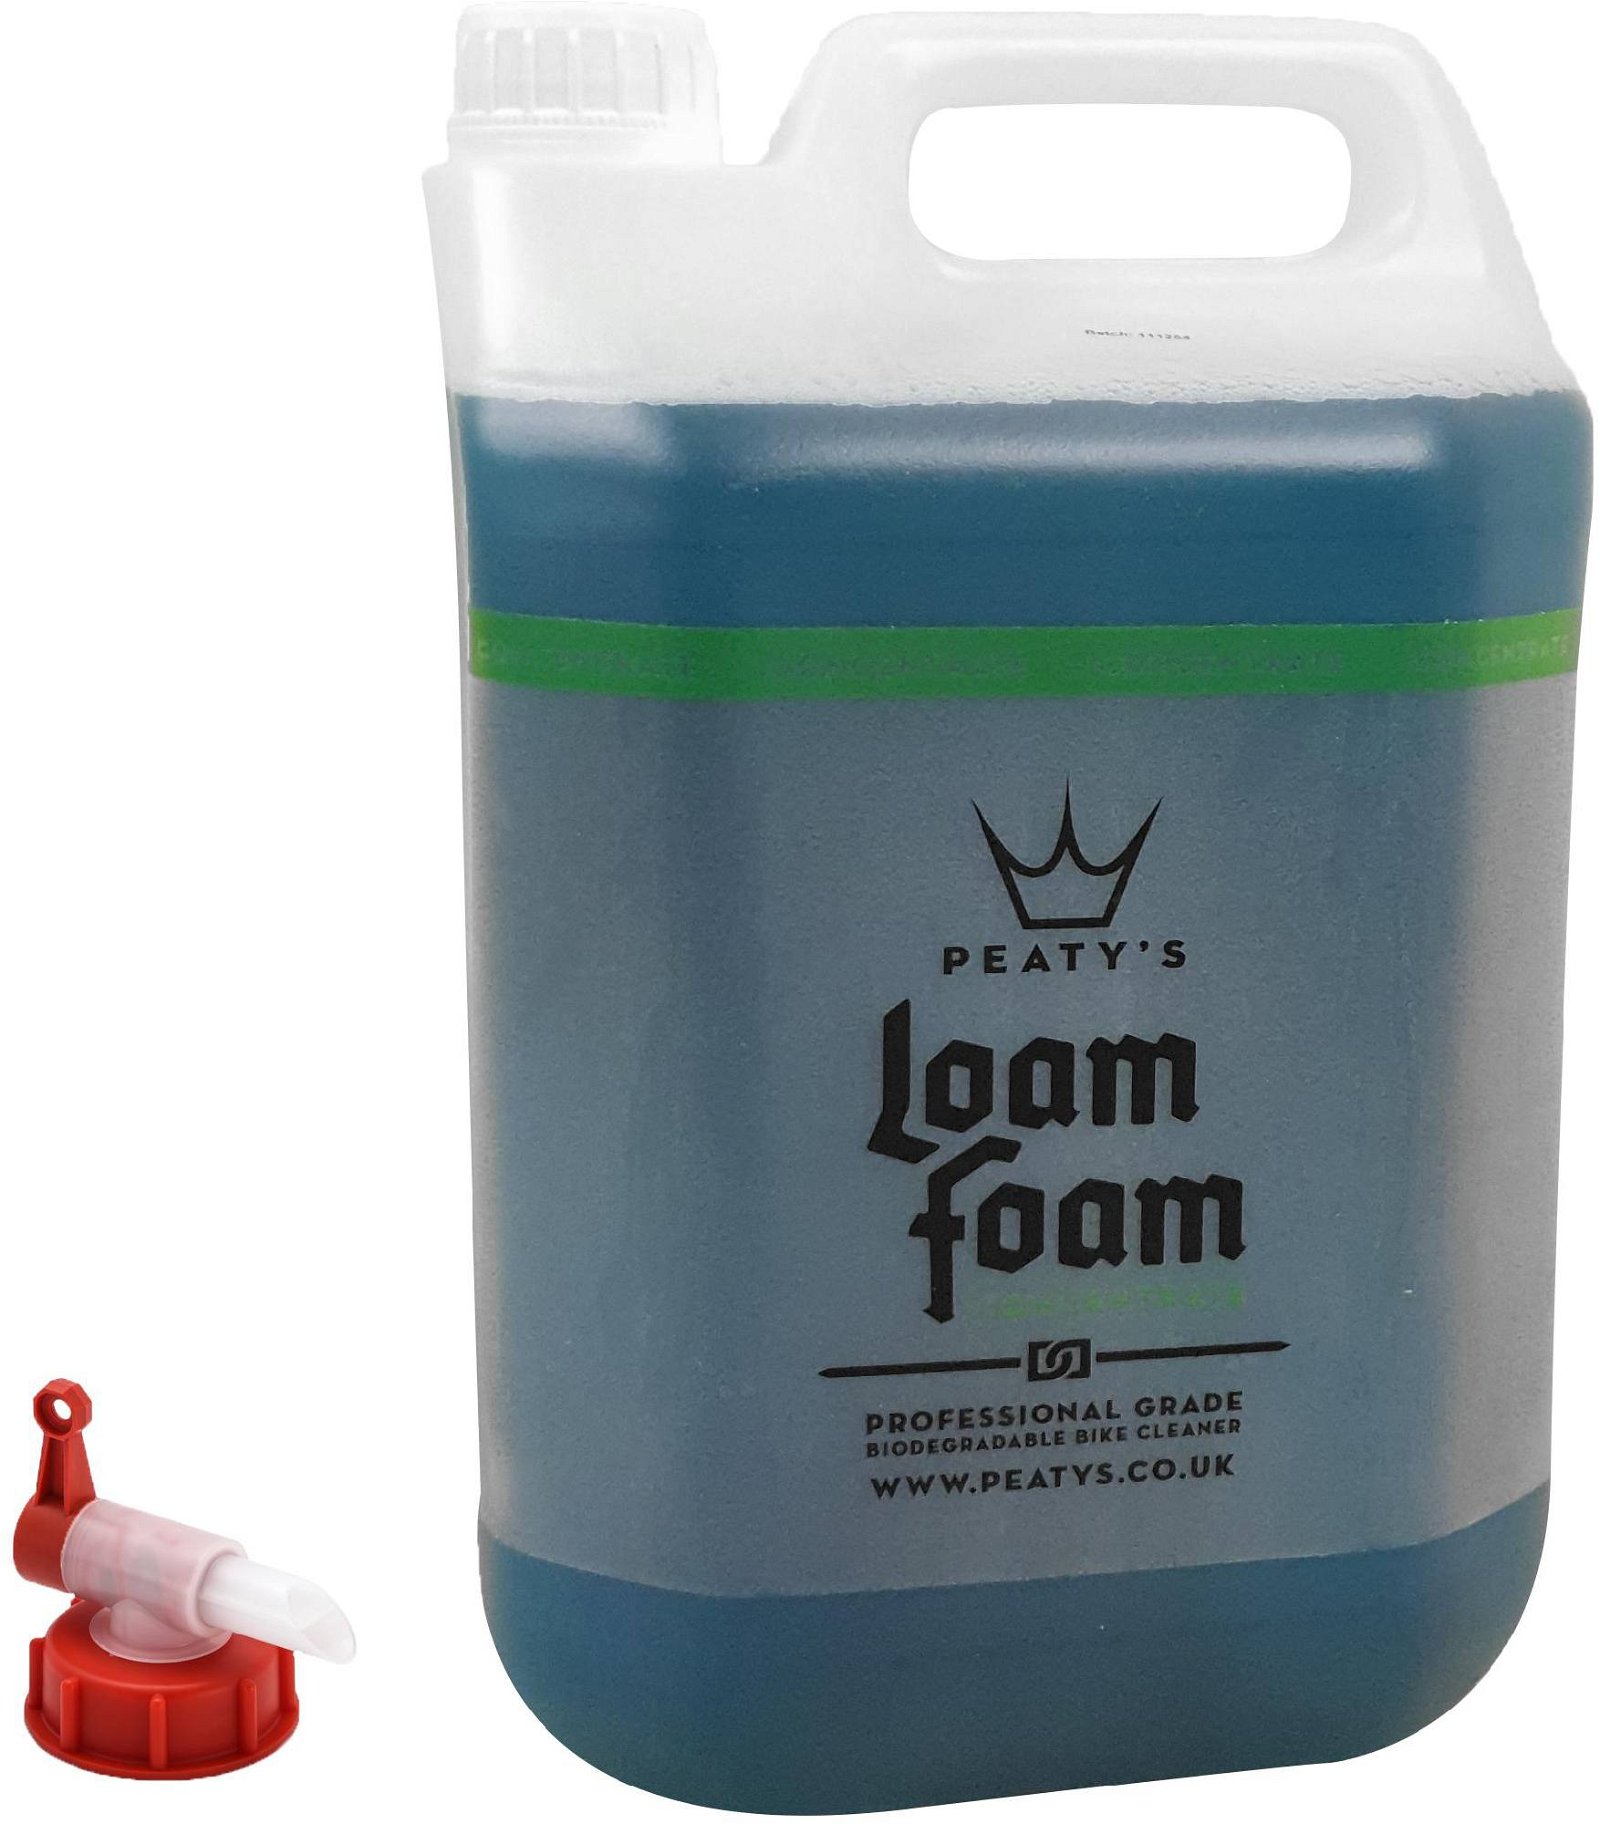 Peaty's LoamFoam Cleaner Consentrate